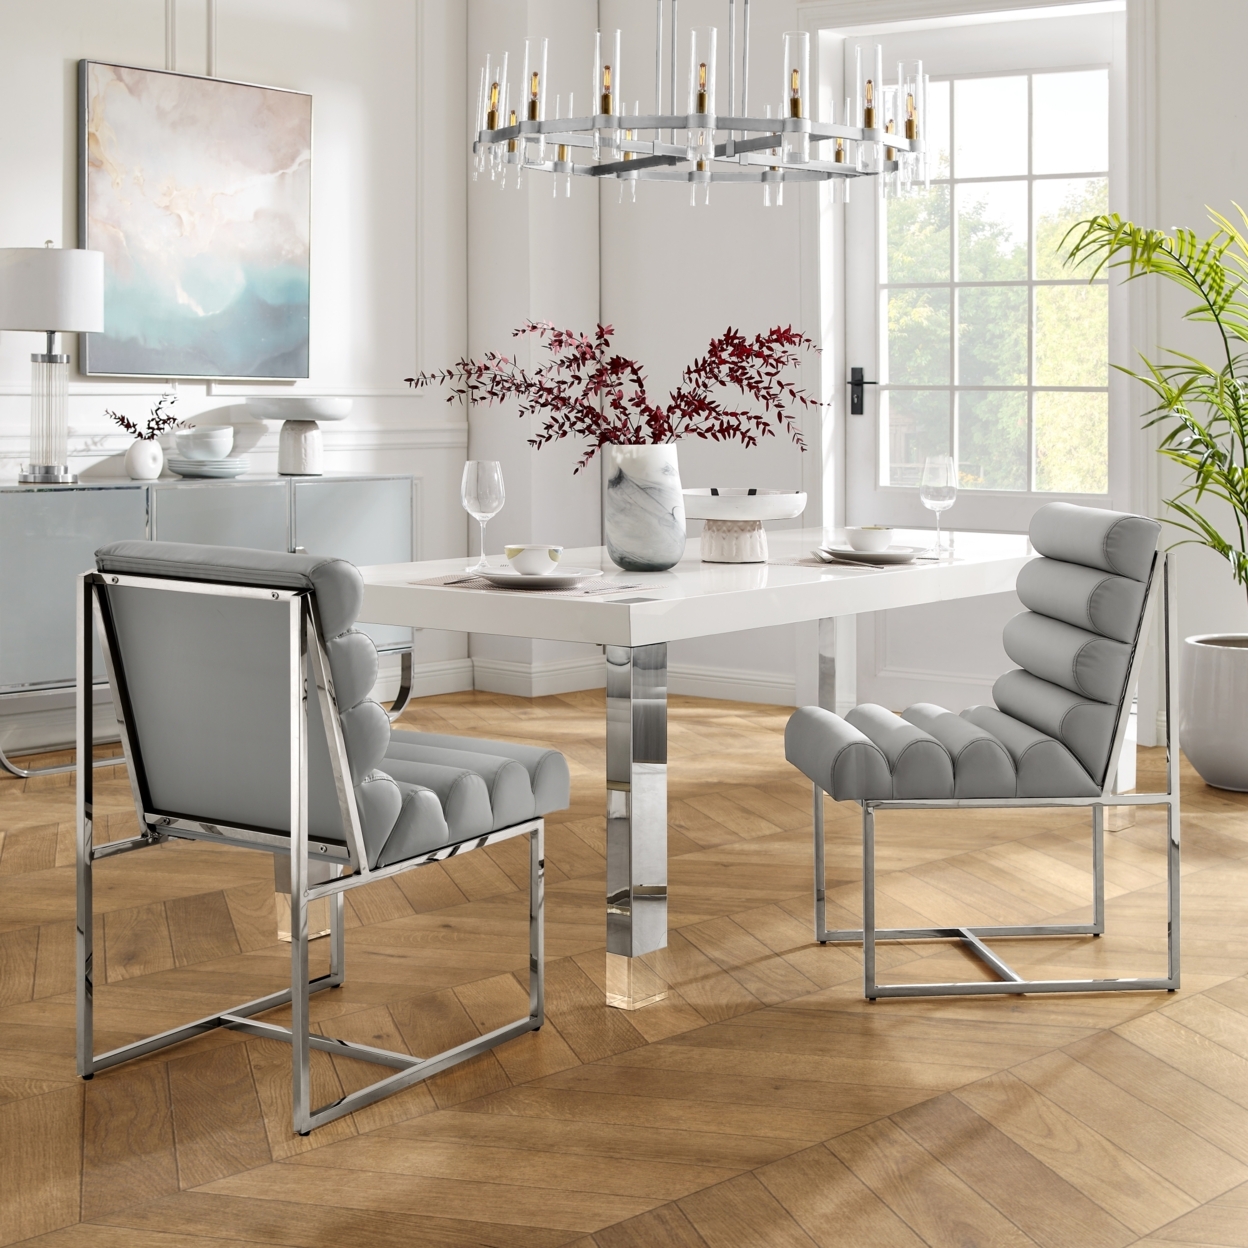 Madelyne Dining Chair - Upholstered, Stainless Steel Frame, Channel Tufted, Armless - Pu Leather Grey/chrome